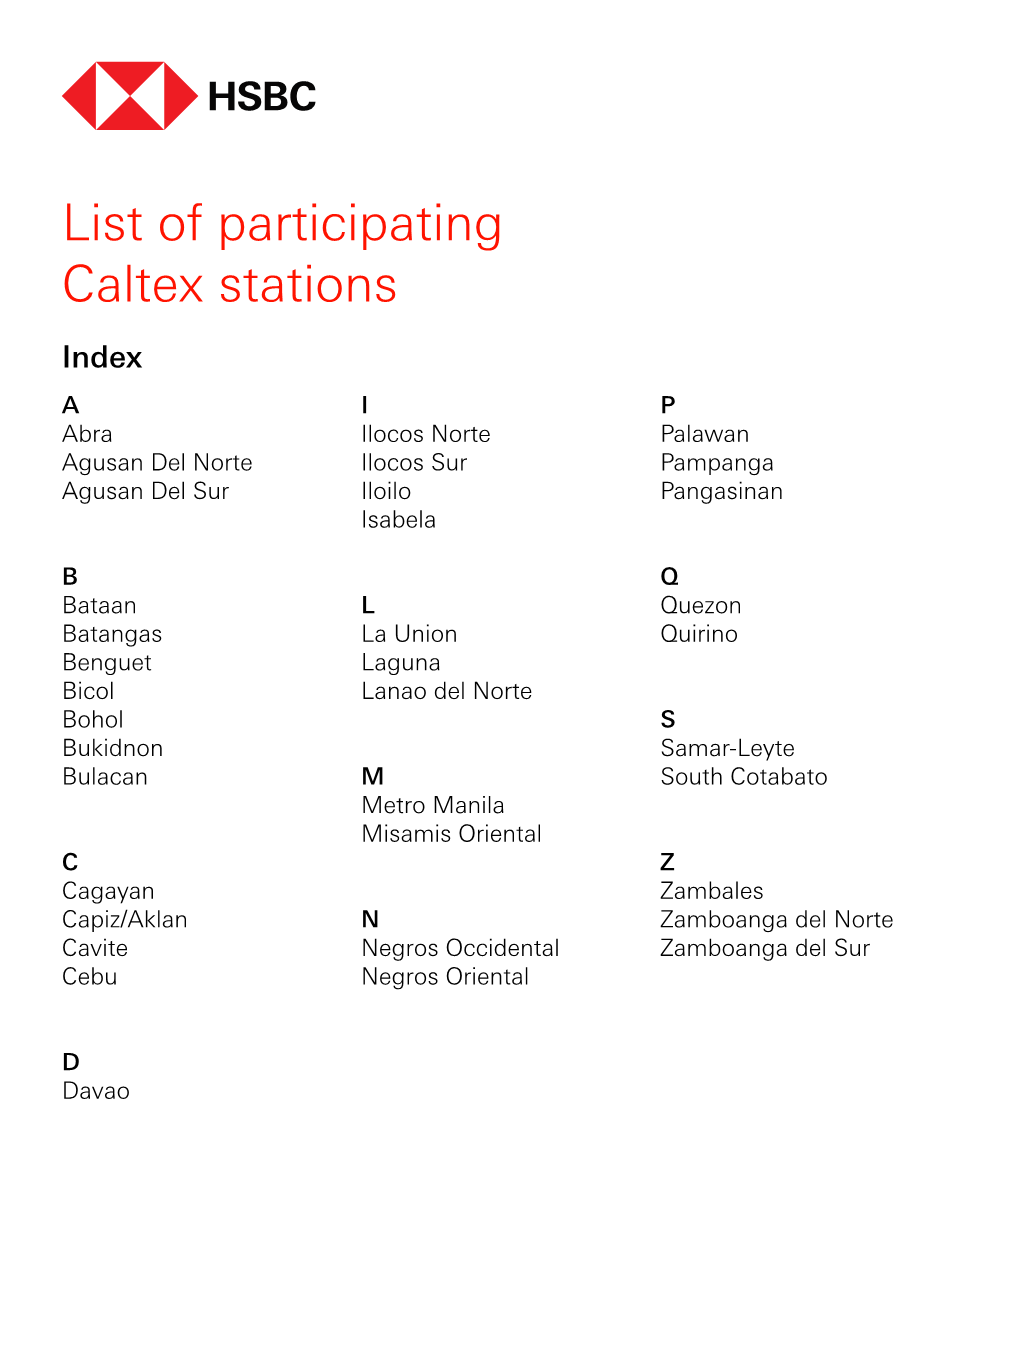 List of Participating Caltex Stations